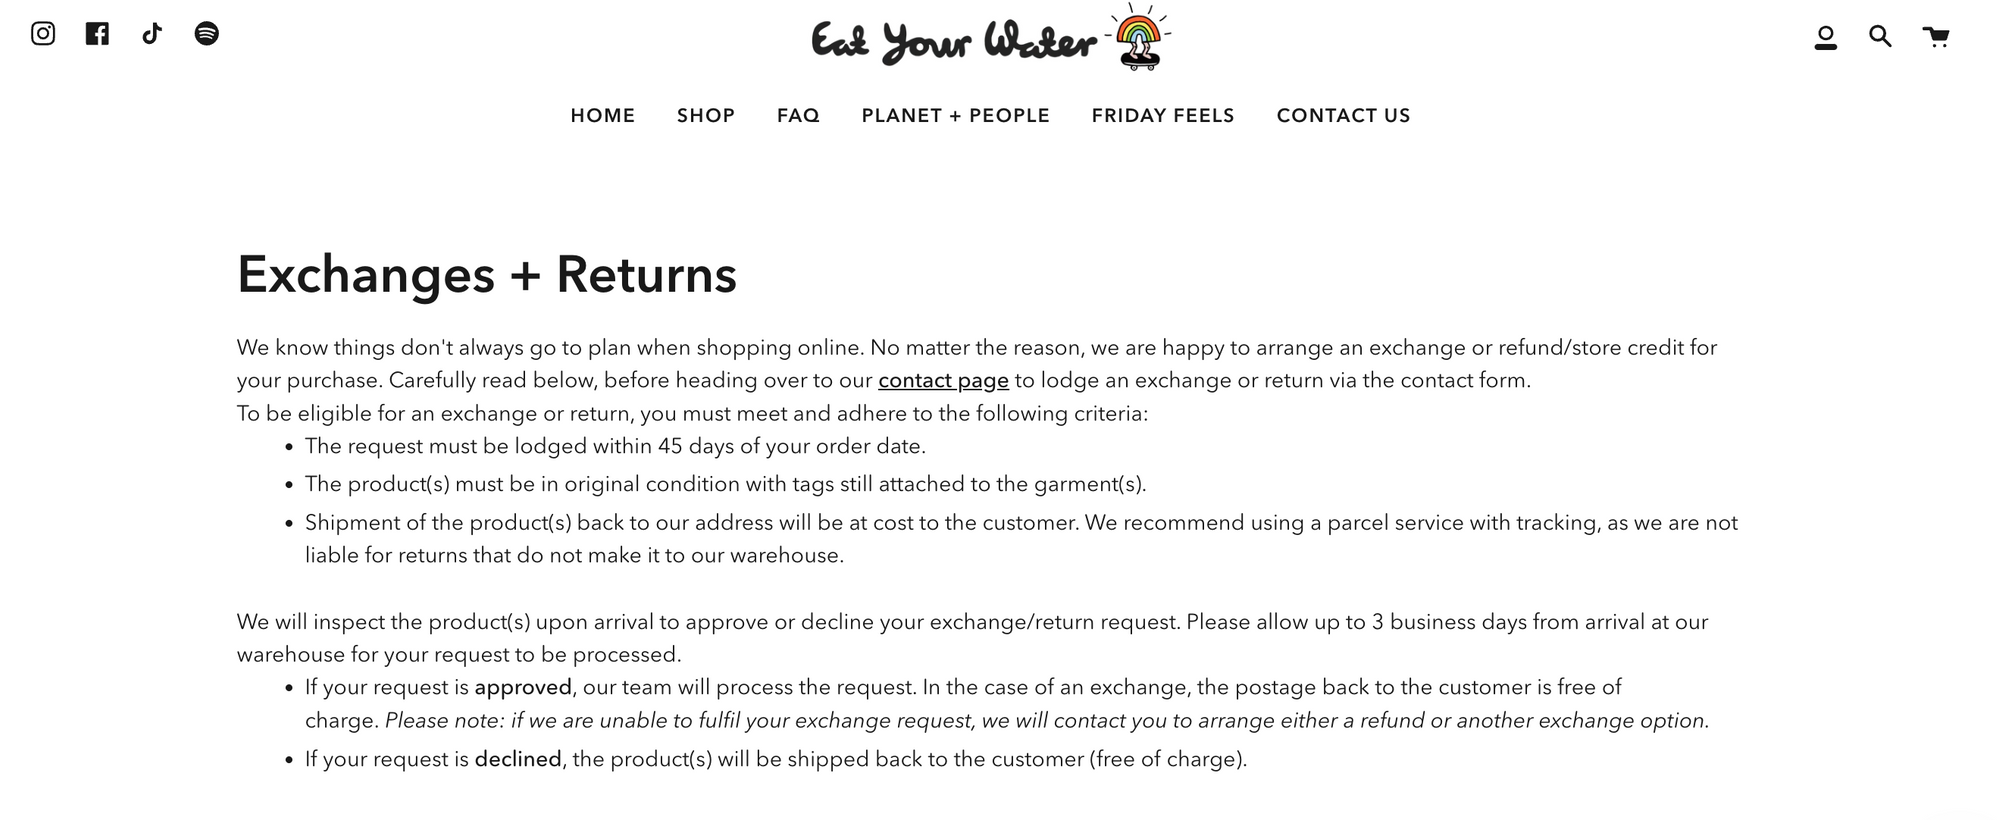 Eat your water exchange and returns policy